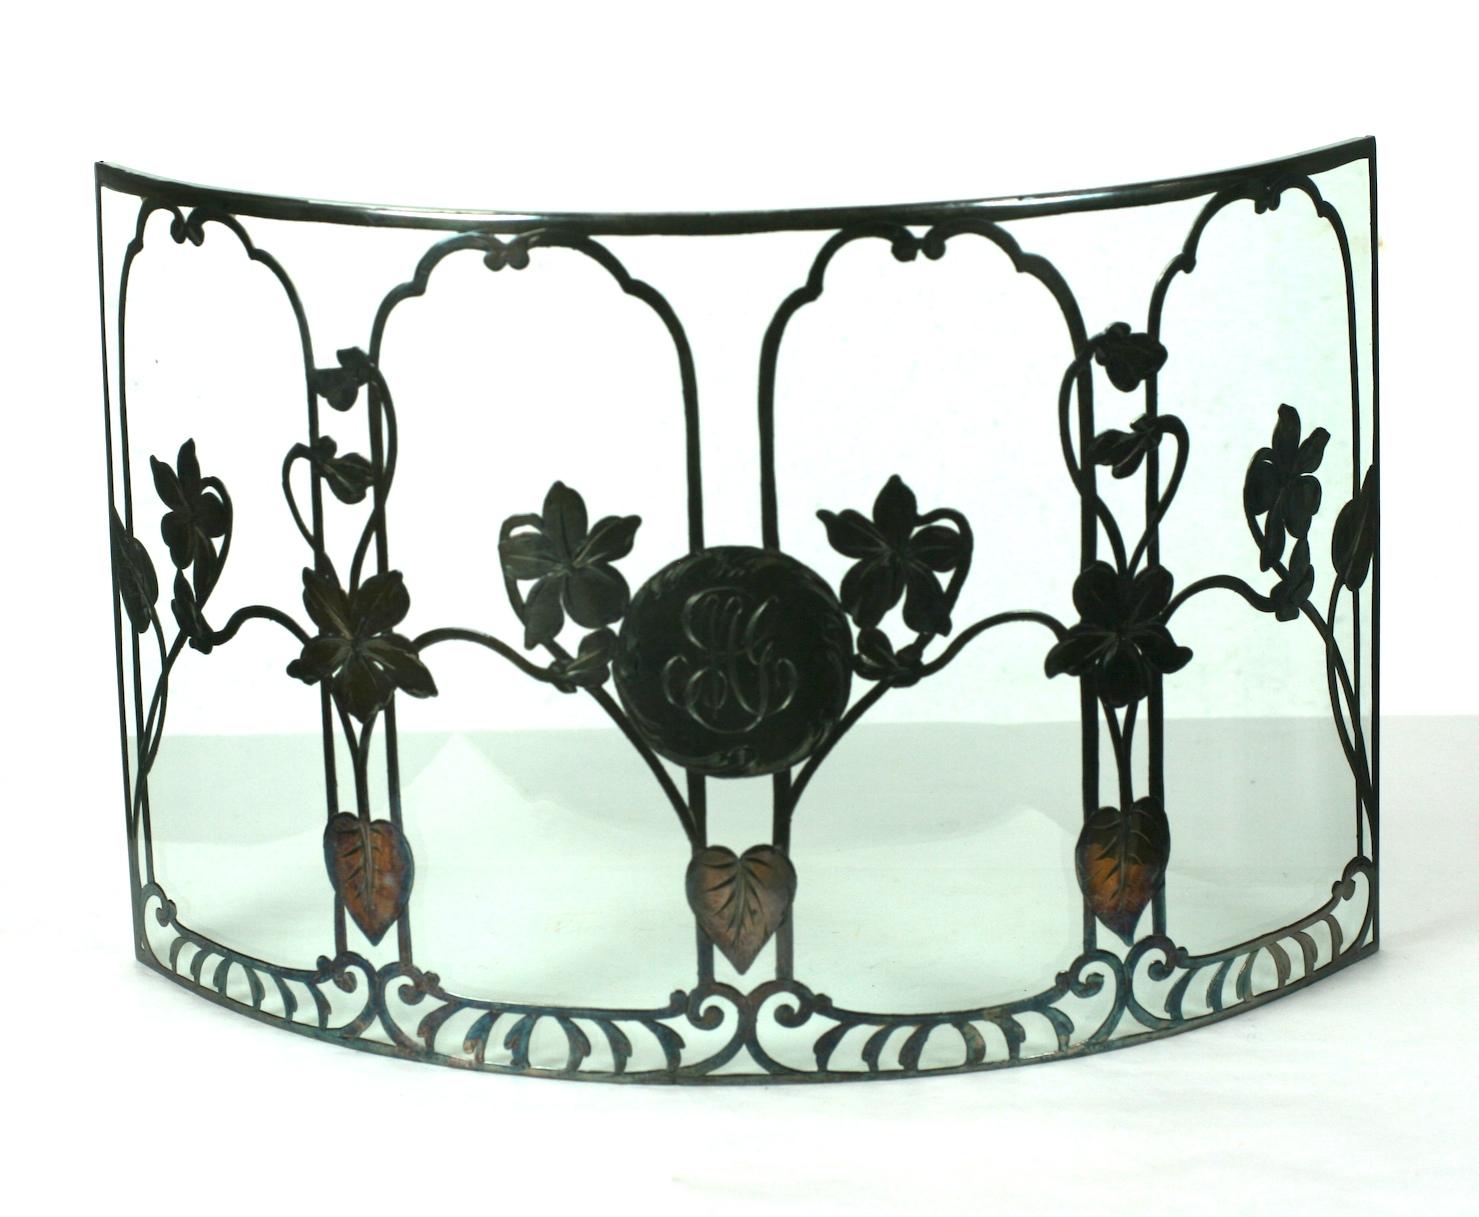 Sterling Silver overlay candle guard from the early 20th century. Art Nouveau sterling violet floral patterns fused to a curved panel of glass with central monogram. Designed for the table behind which candles were lit. Measures: 10.5